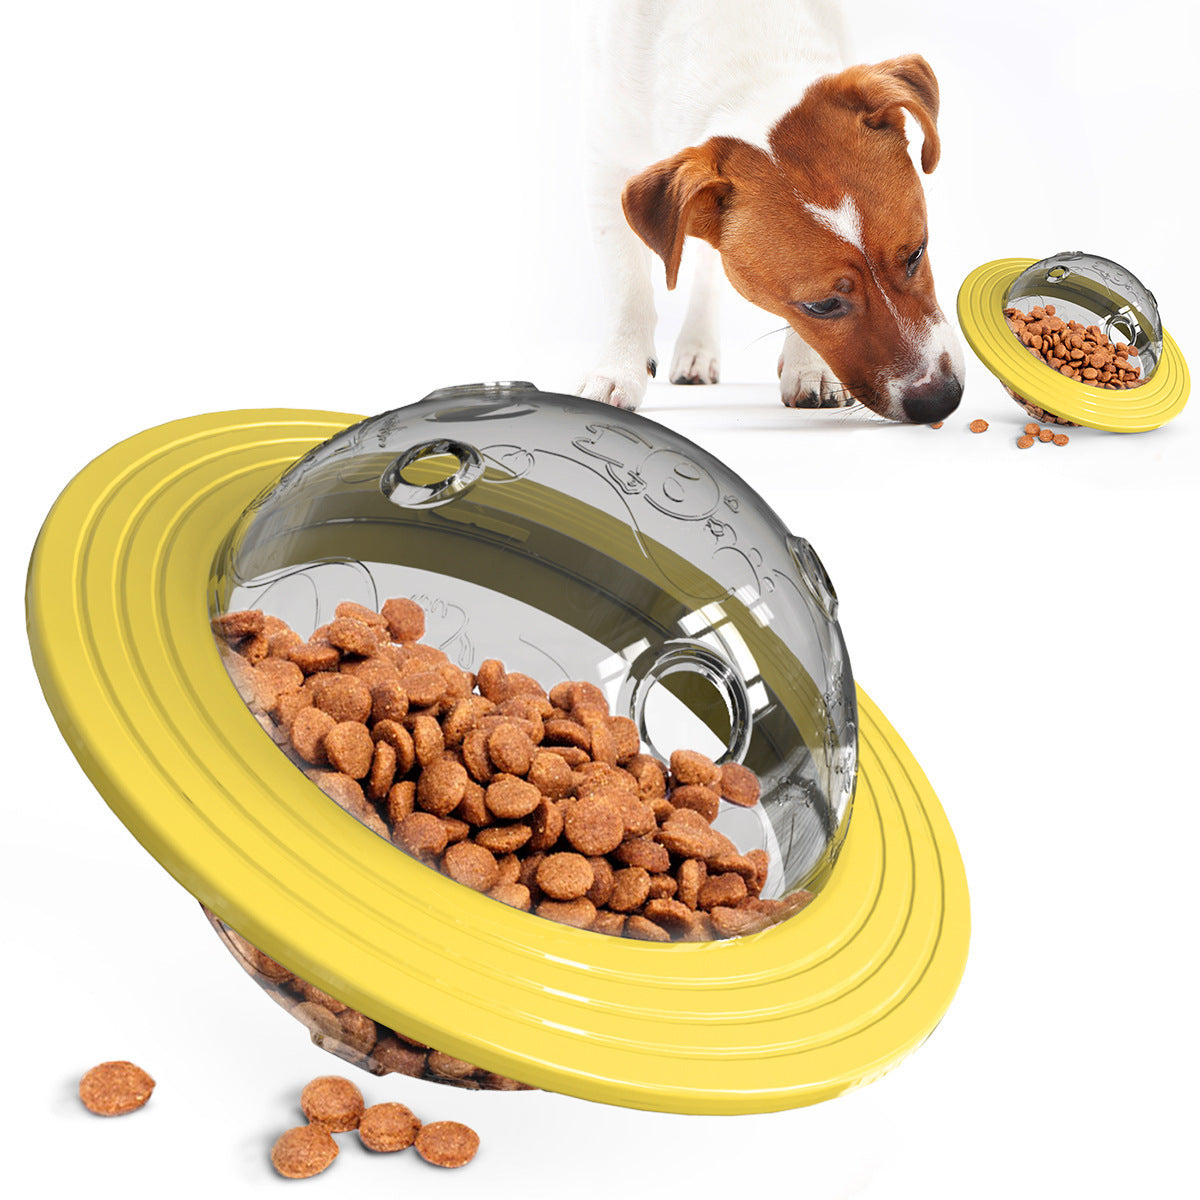 Space Interactive Toy for Treat Storage